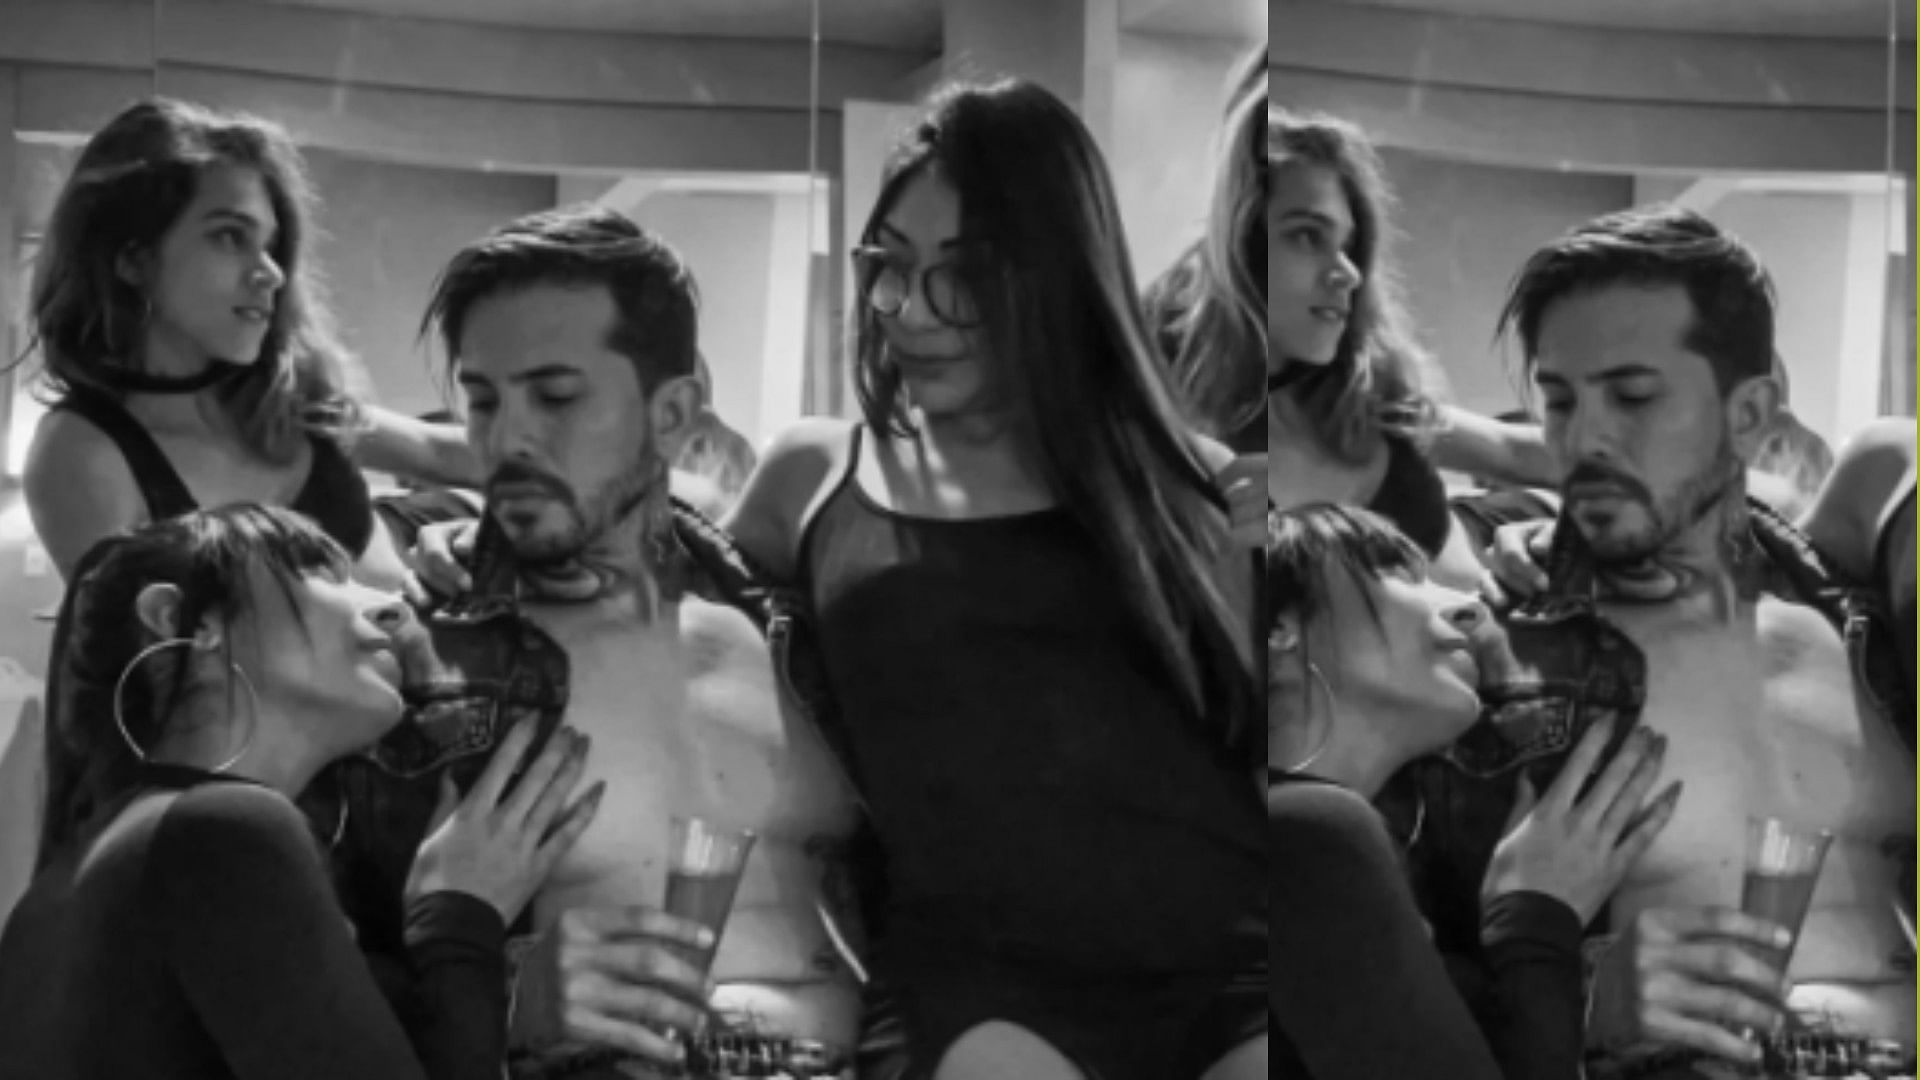 brazil Model Arthur O Urso married to six women teases new relationship with a post on instagram